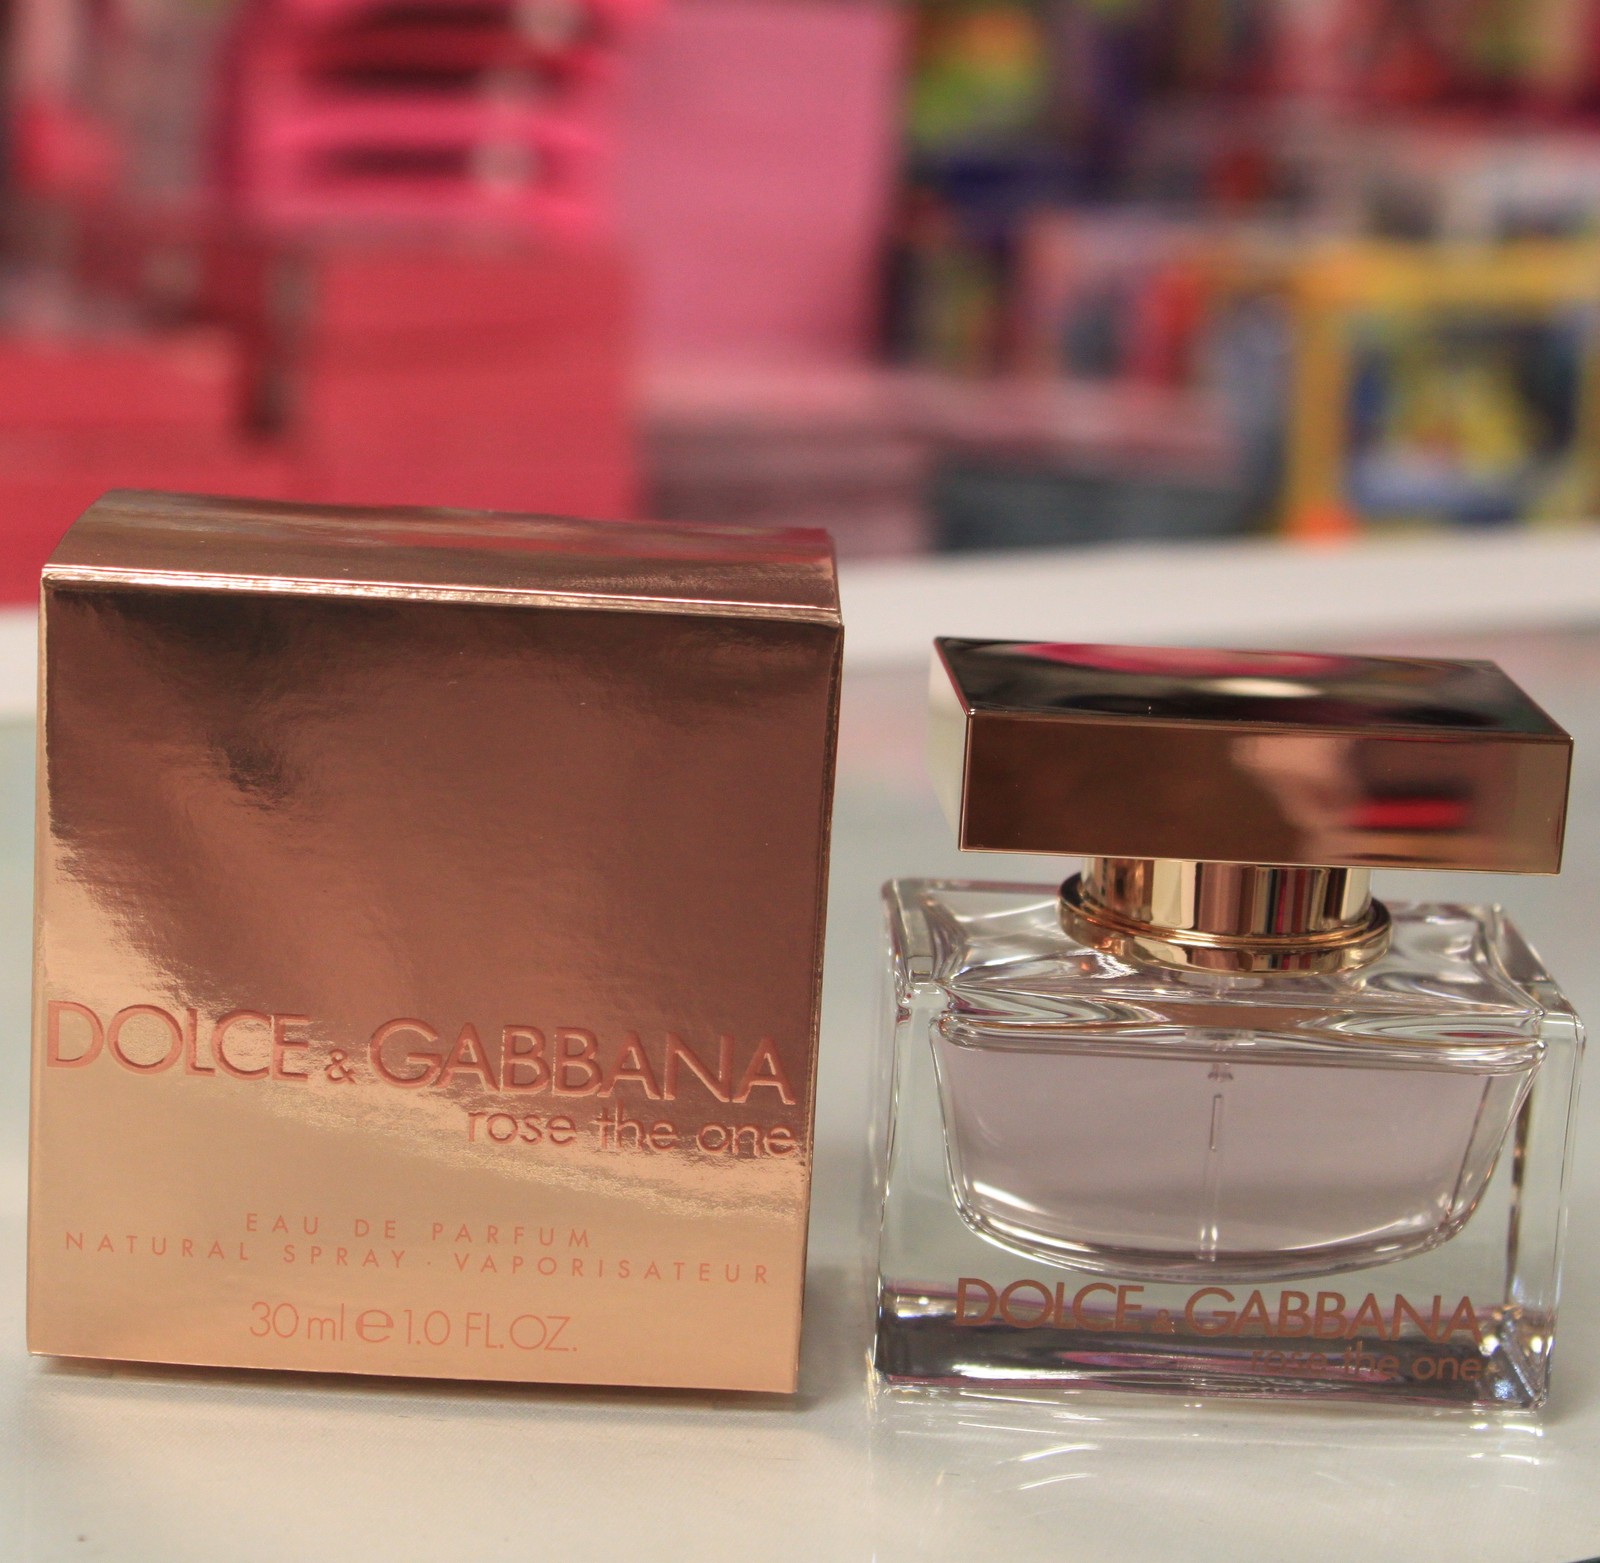 Dolce & Gabbana The One Rose Women 1.0 fl.oz and 50 similar items